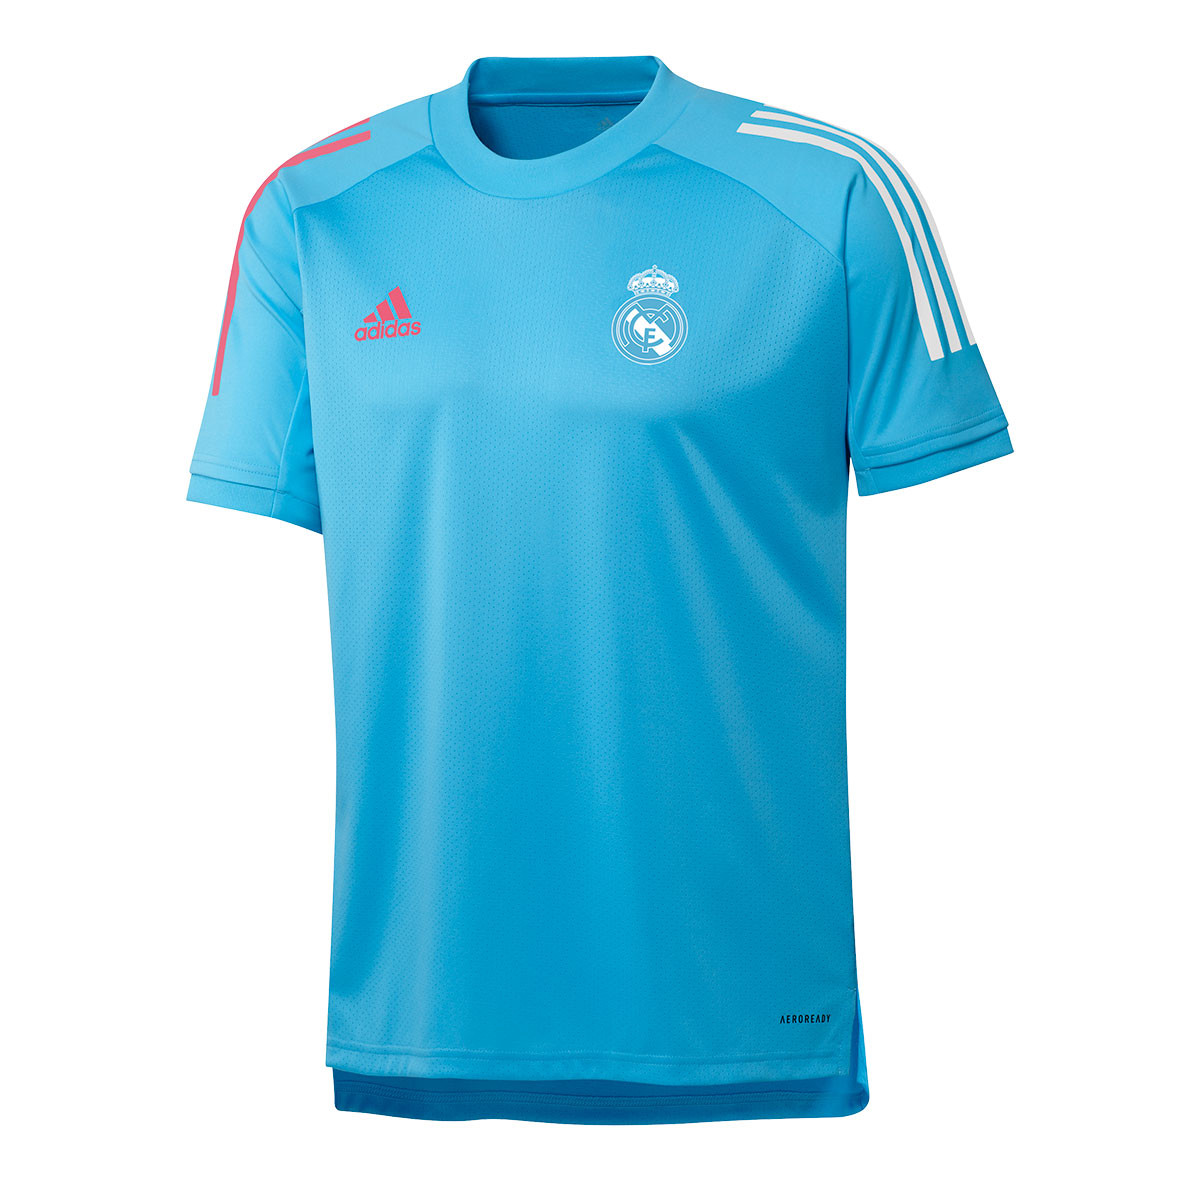 15+ Jersey Training Real Madrid 2021 Pictures